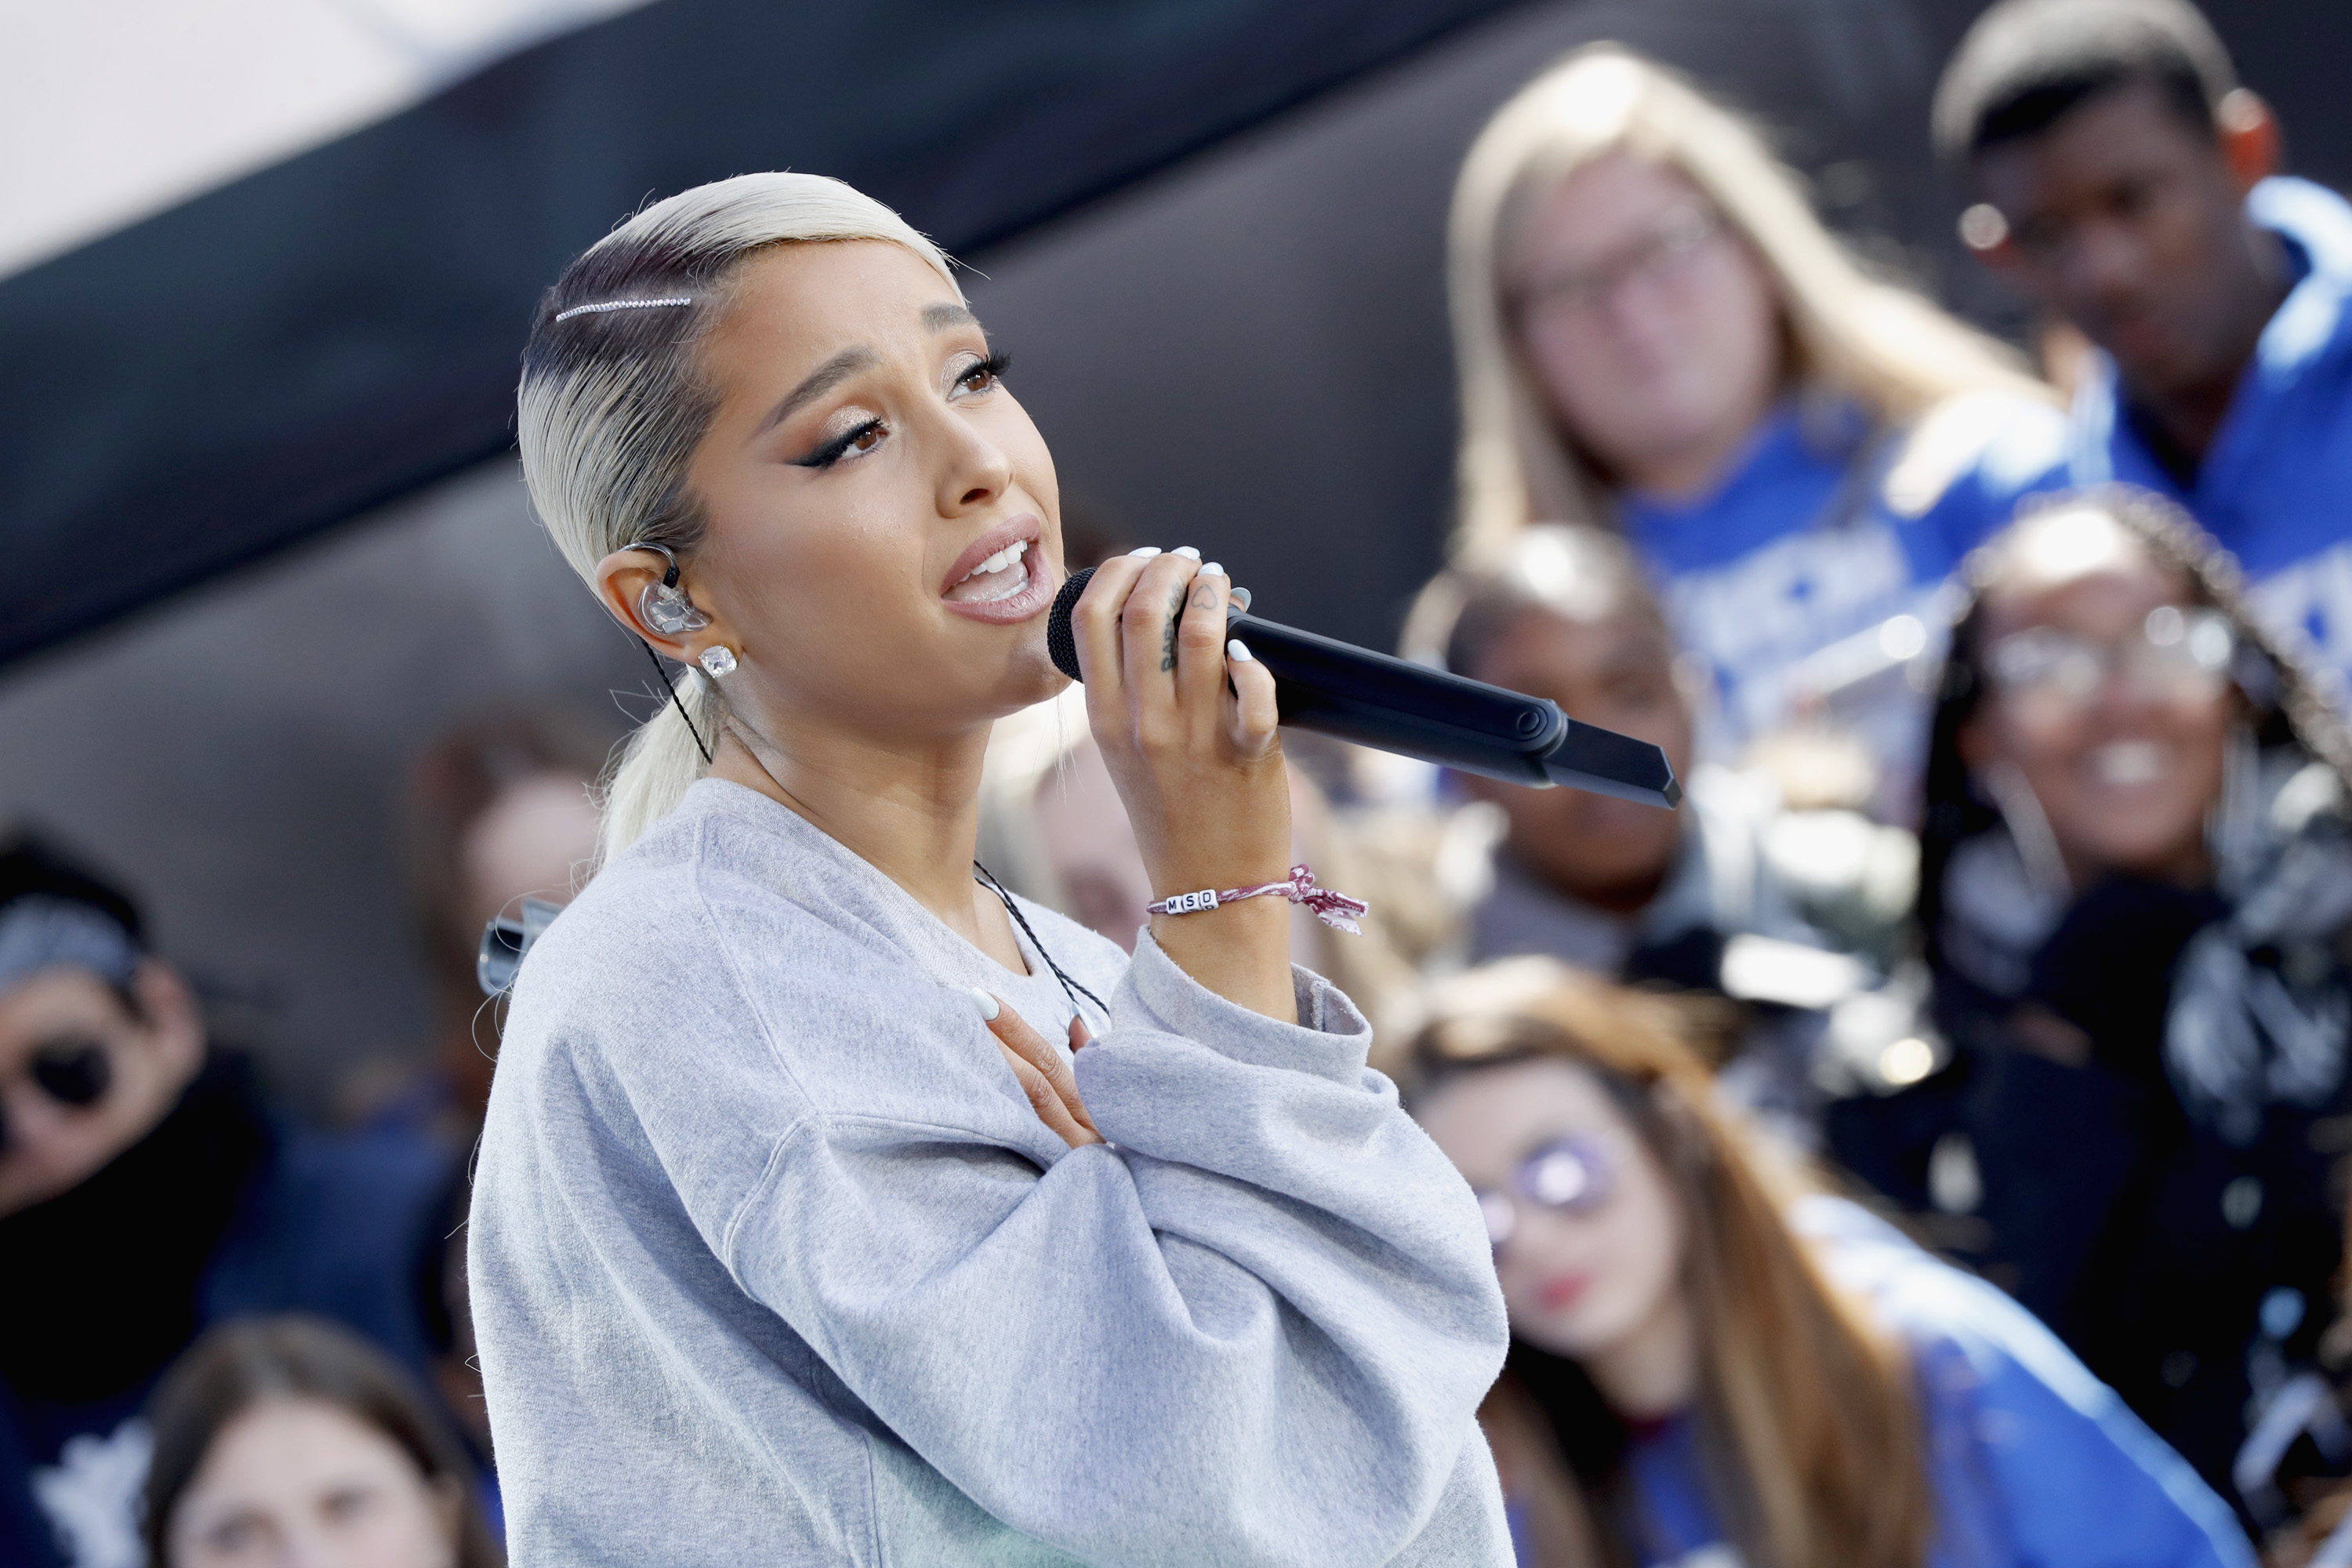 Ariana Grande performs onstage at March For Our Lives on March 24, 2018 in Washington, DC.  